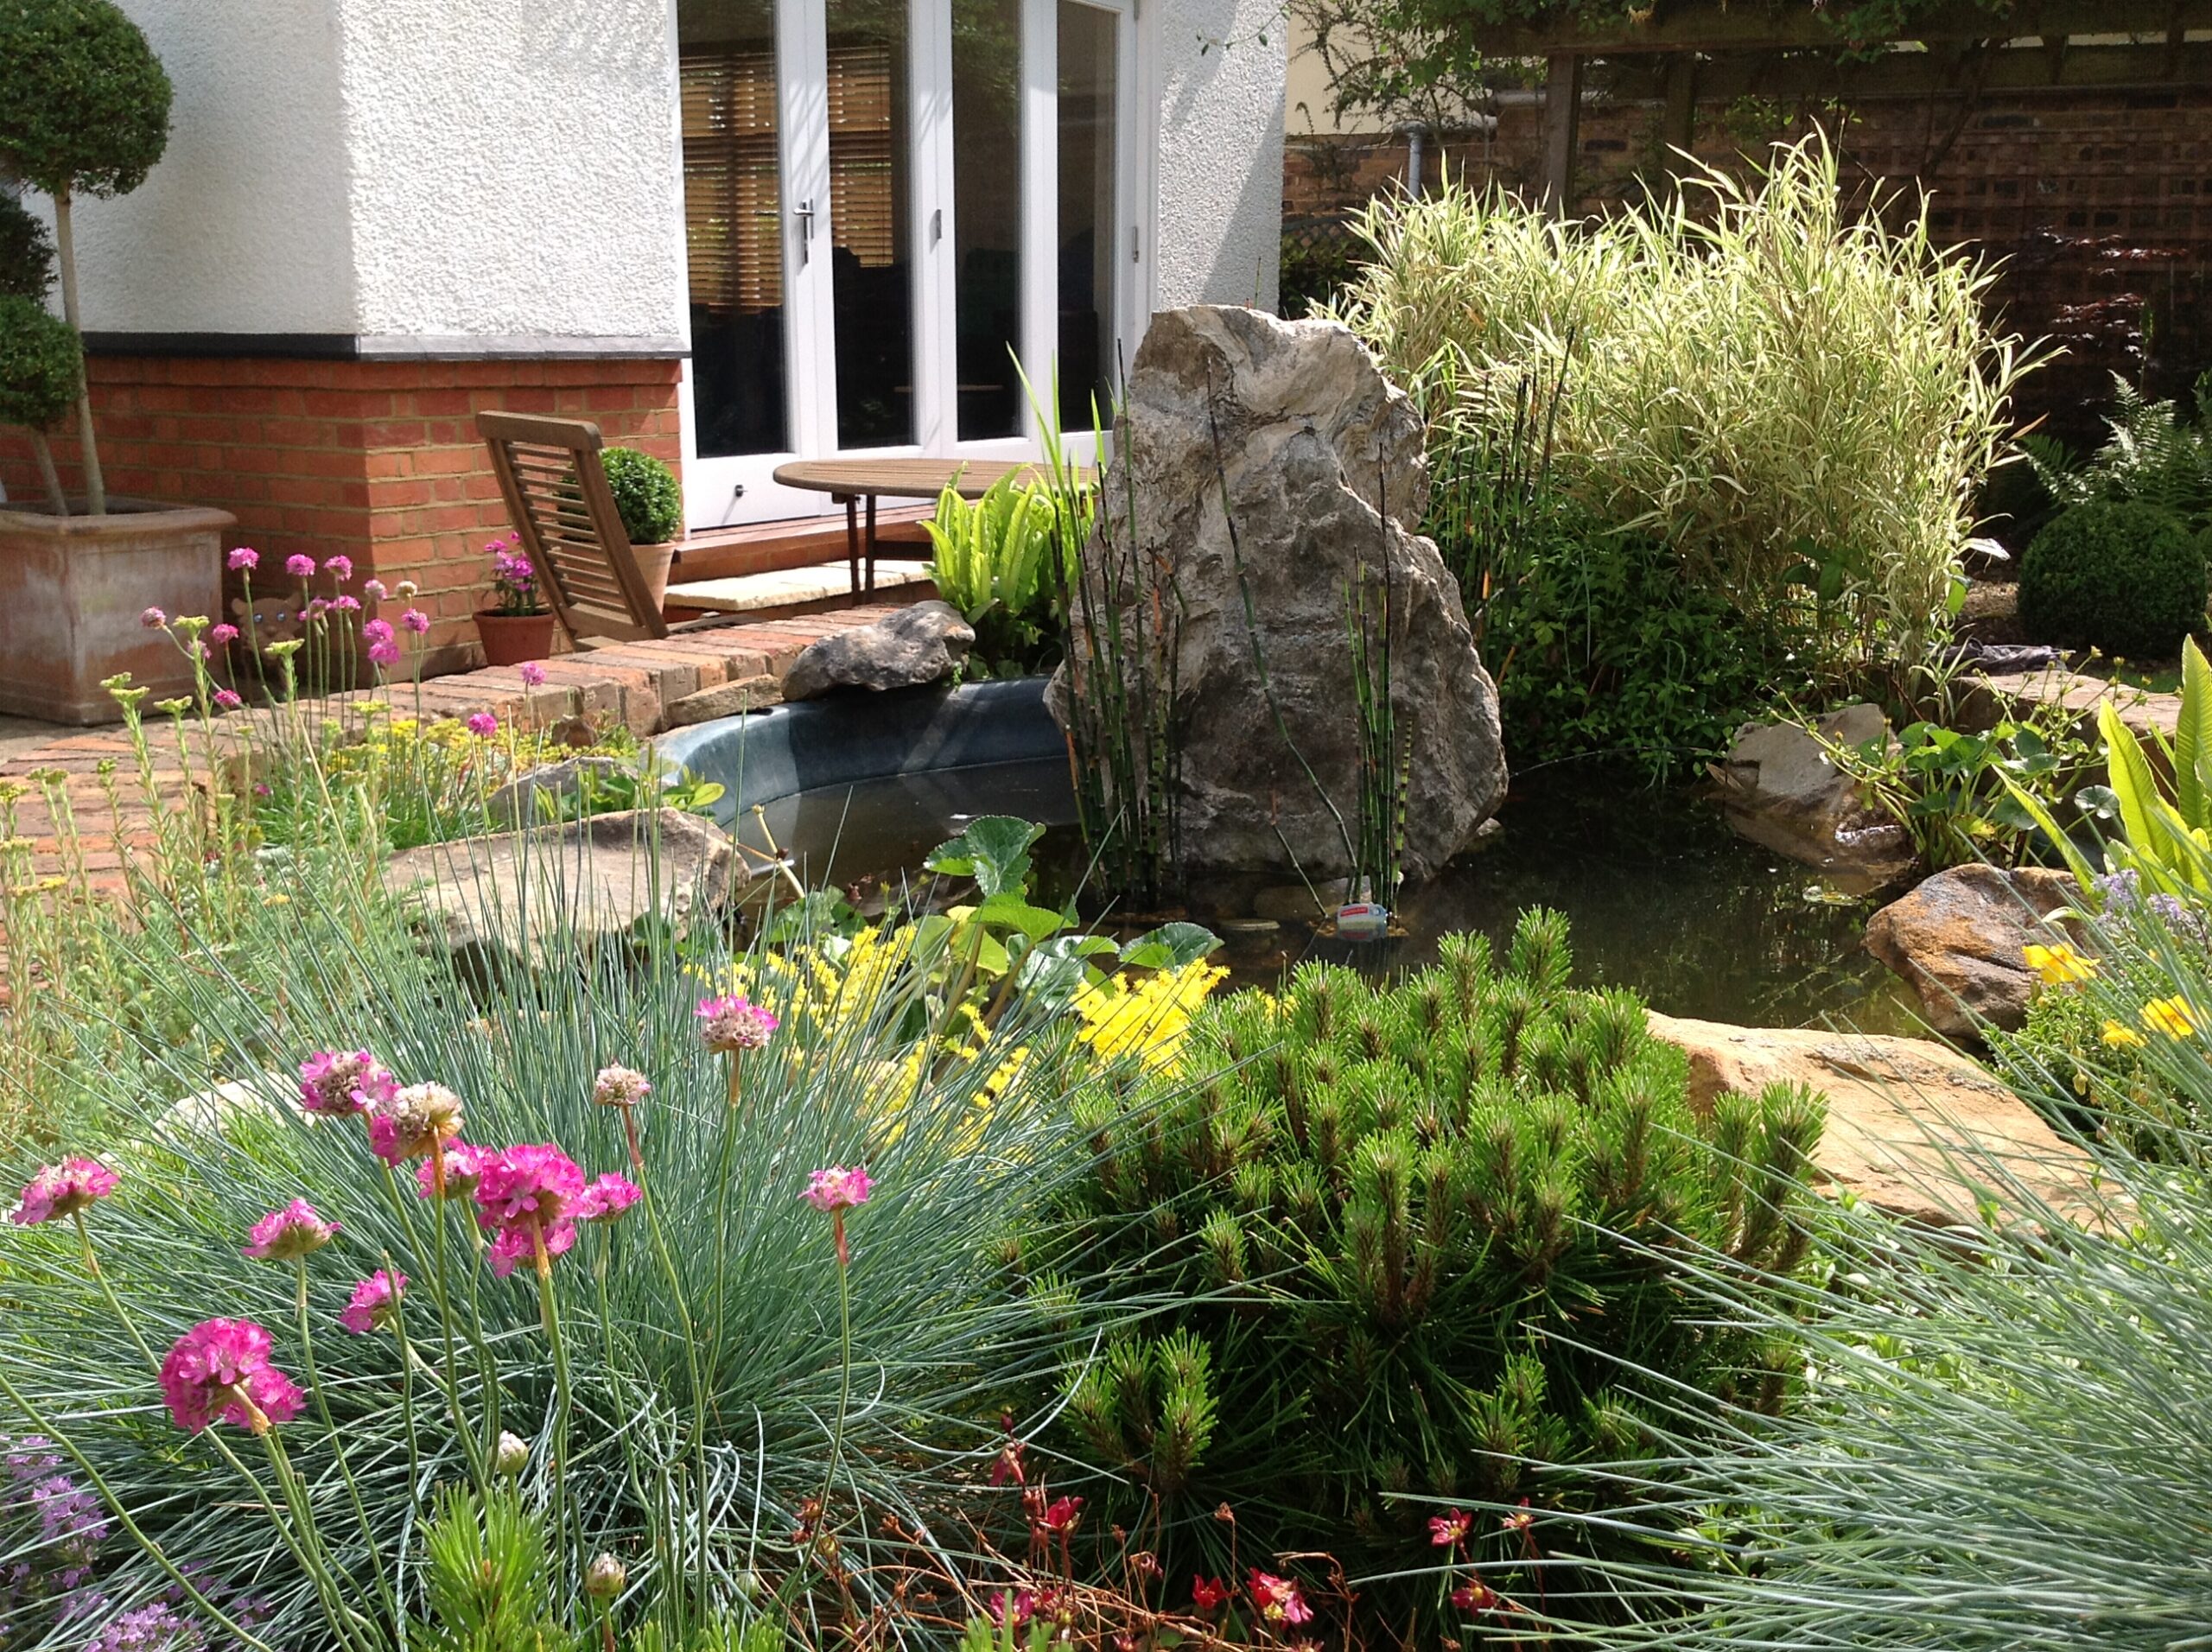 Planting – Water Feature